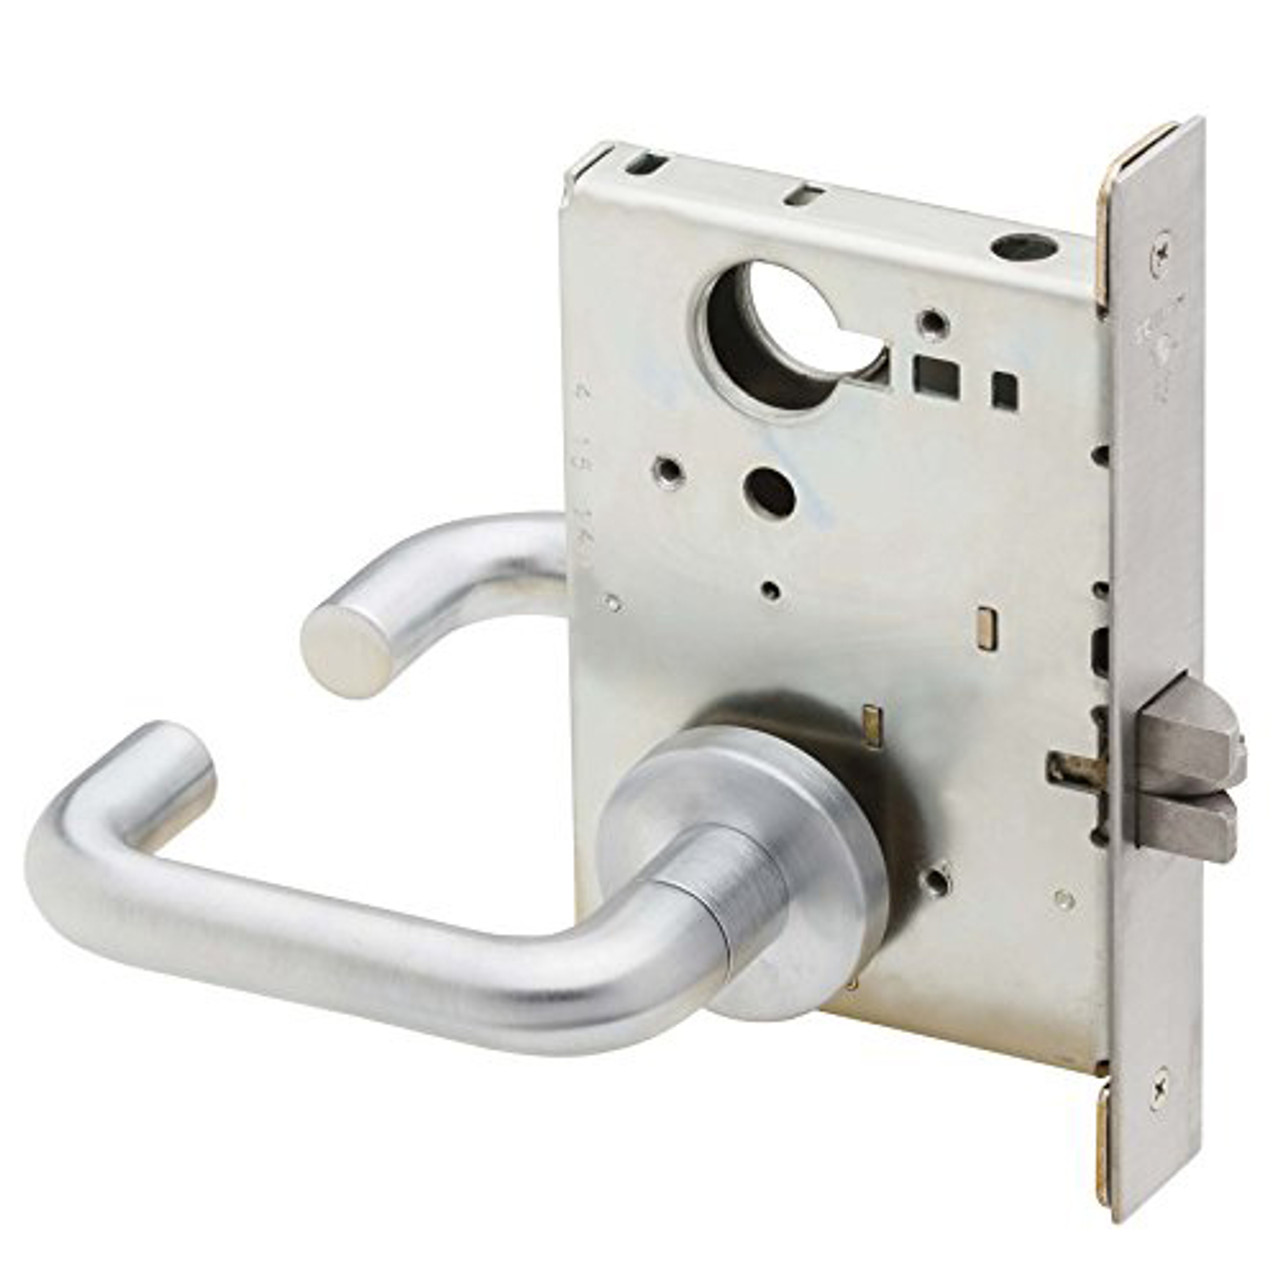 L9010-03A-613 Schlage L Series Passage Latch Commercial Mortise Lock with 03 Cast Lever Design in Oil Rubbed Bronze